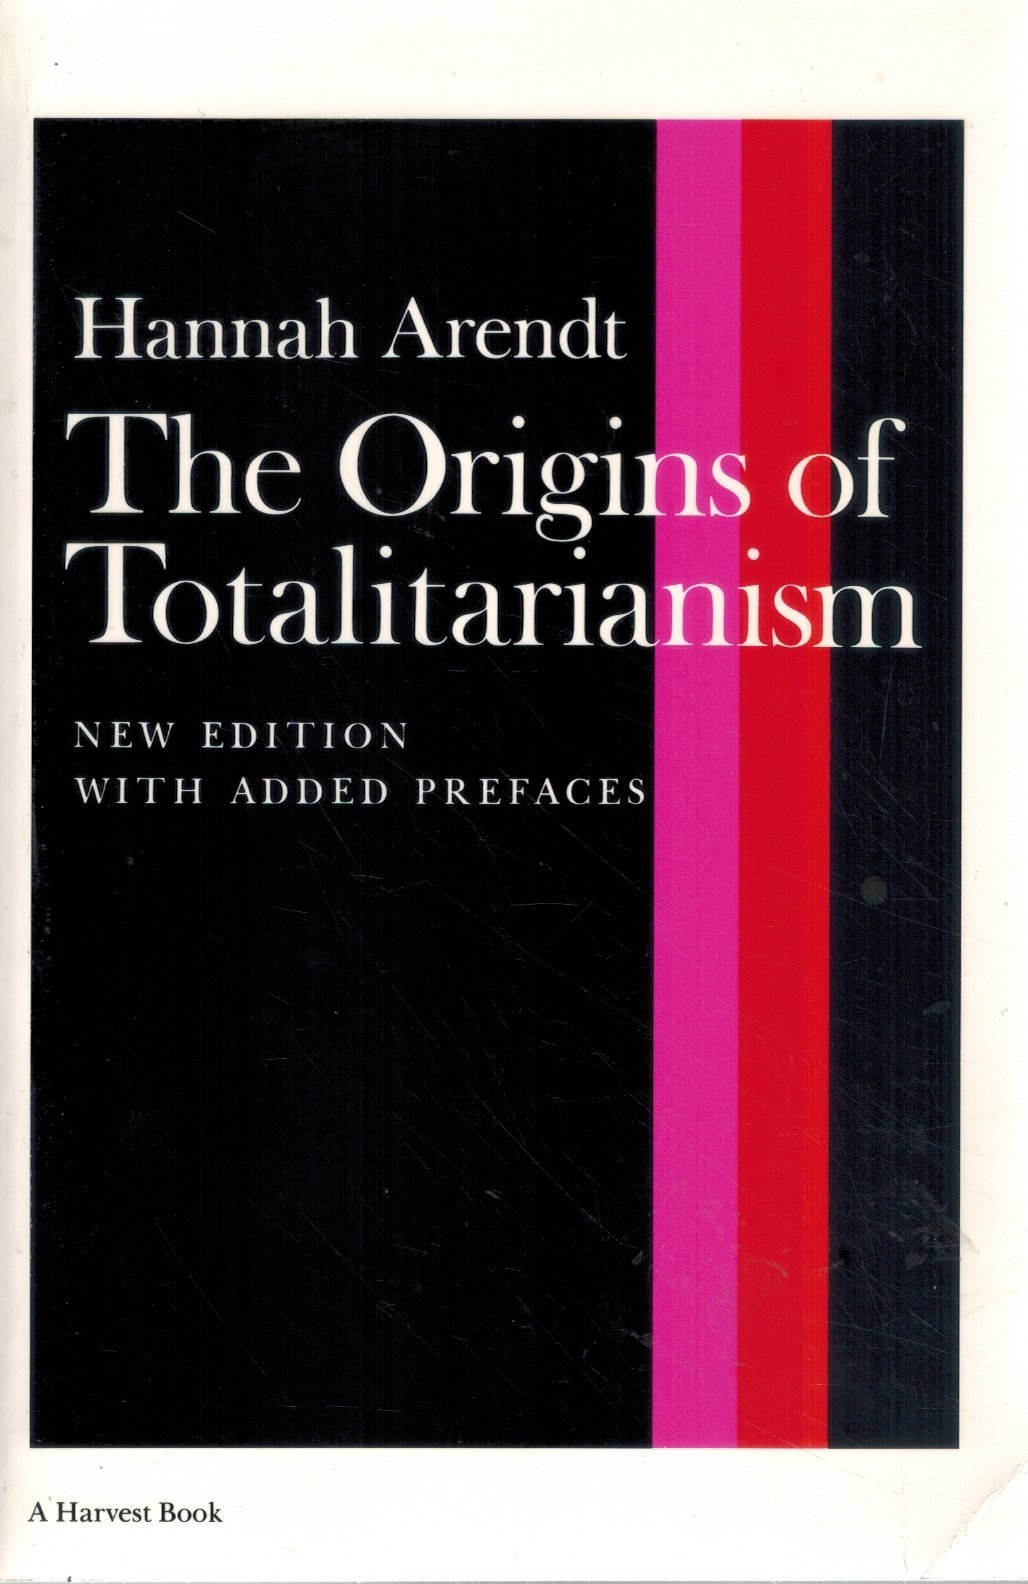 THE ORIGINS OF TOTALITARIANISM  by Arendt, Hannah